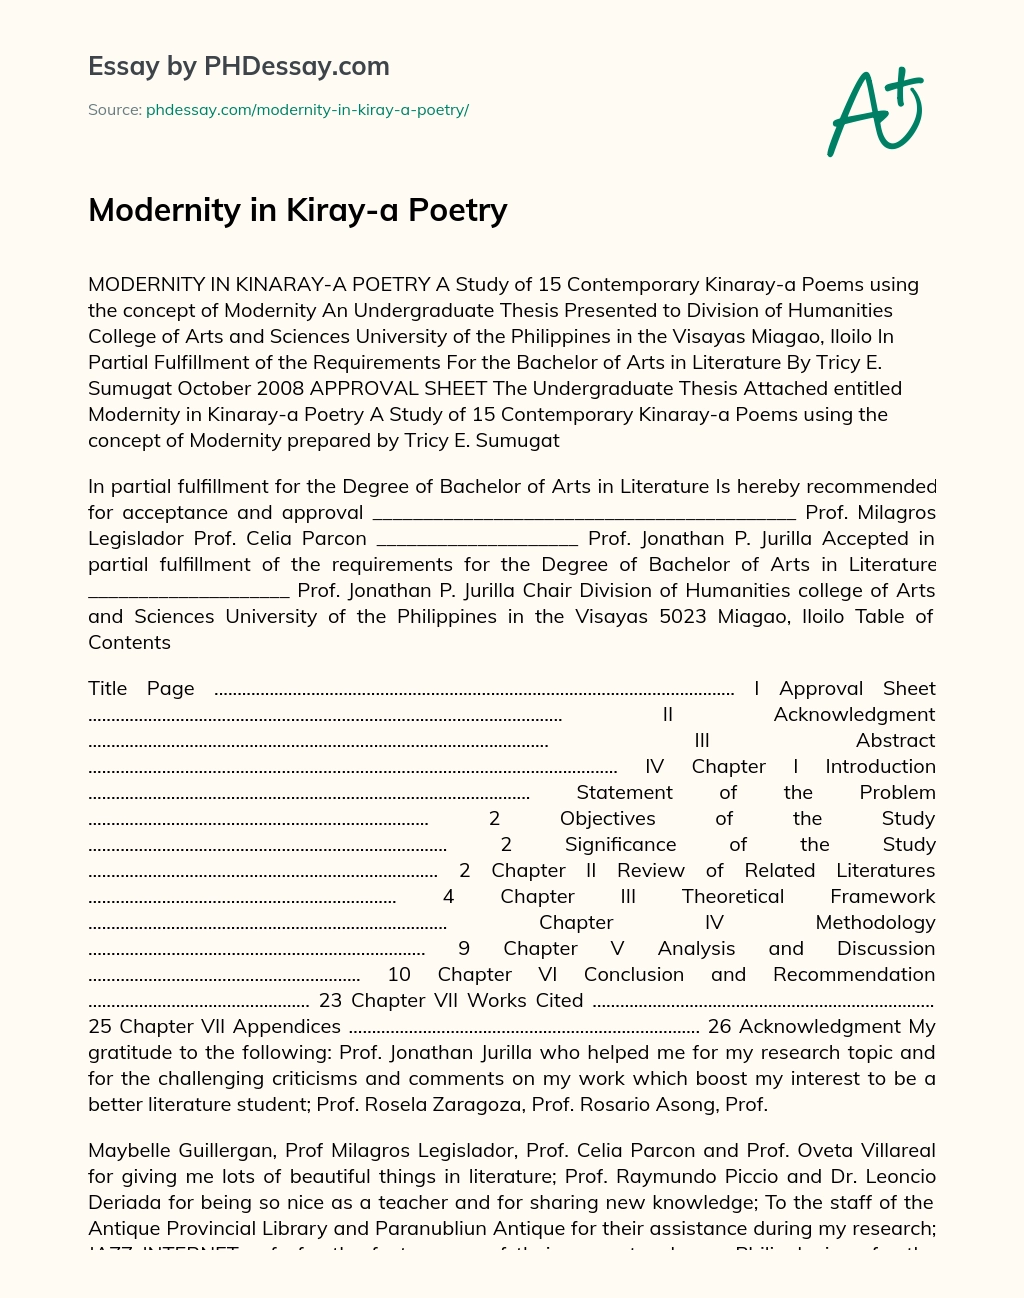 Modernity in Kiray-a Poetry essay